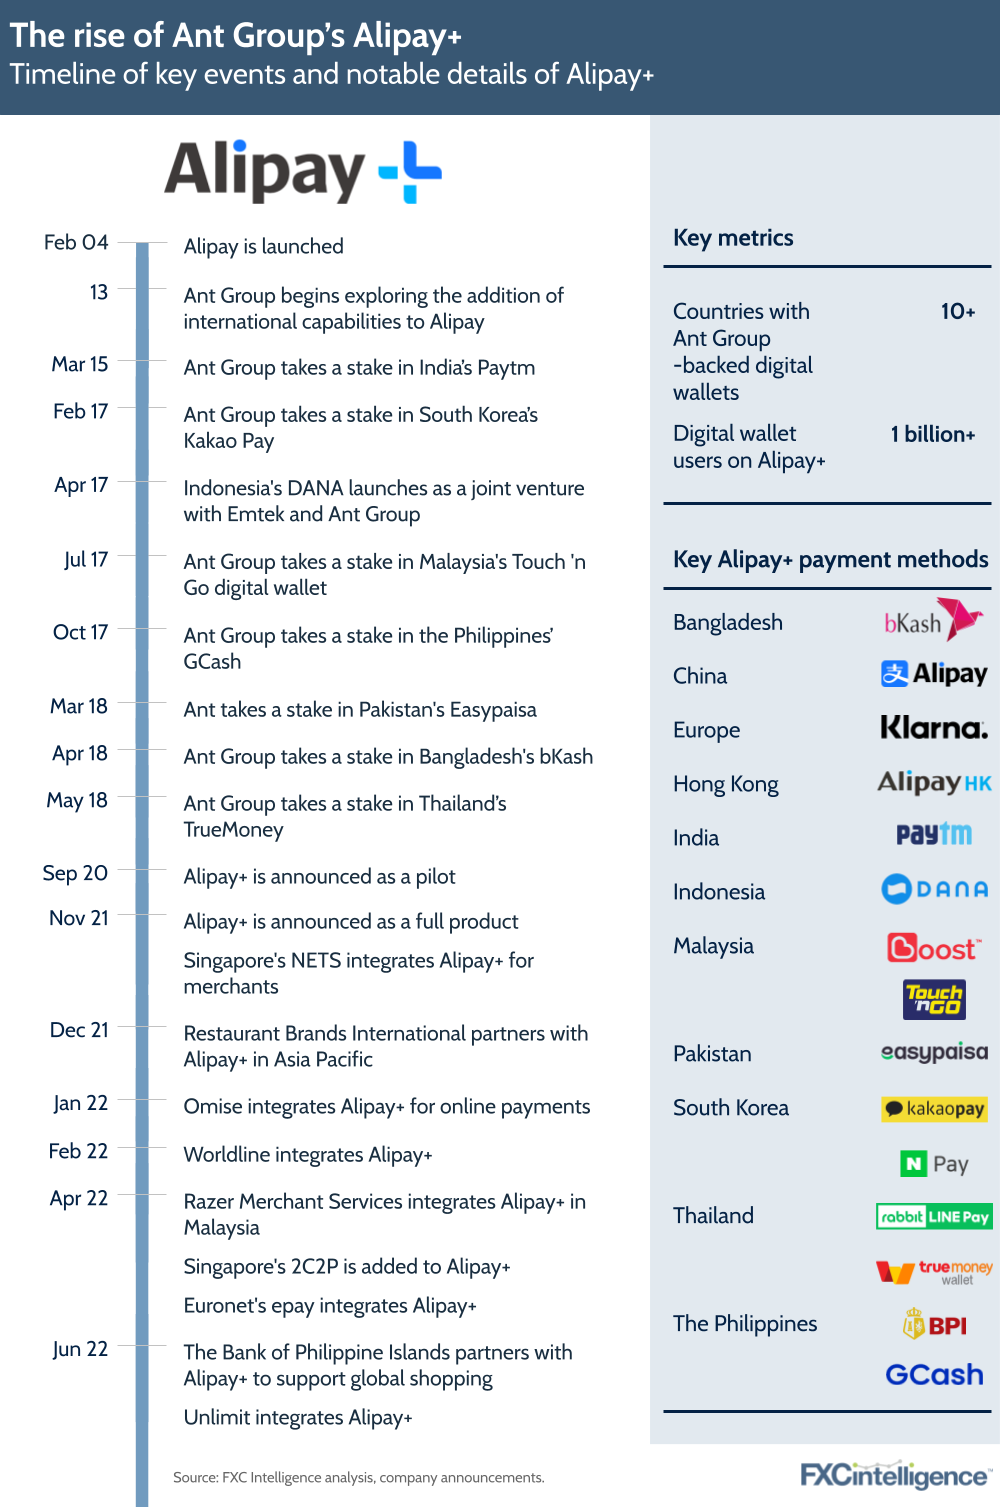 Timeline of key events and notable details of Alipay+